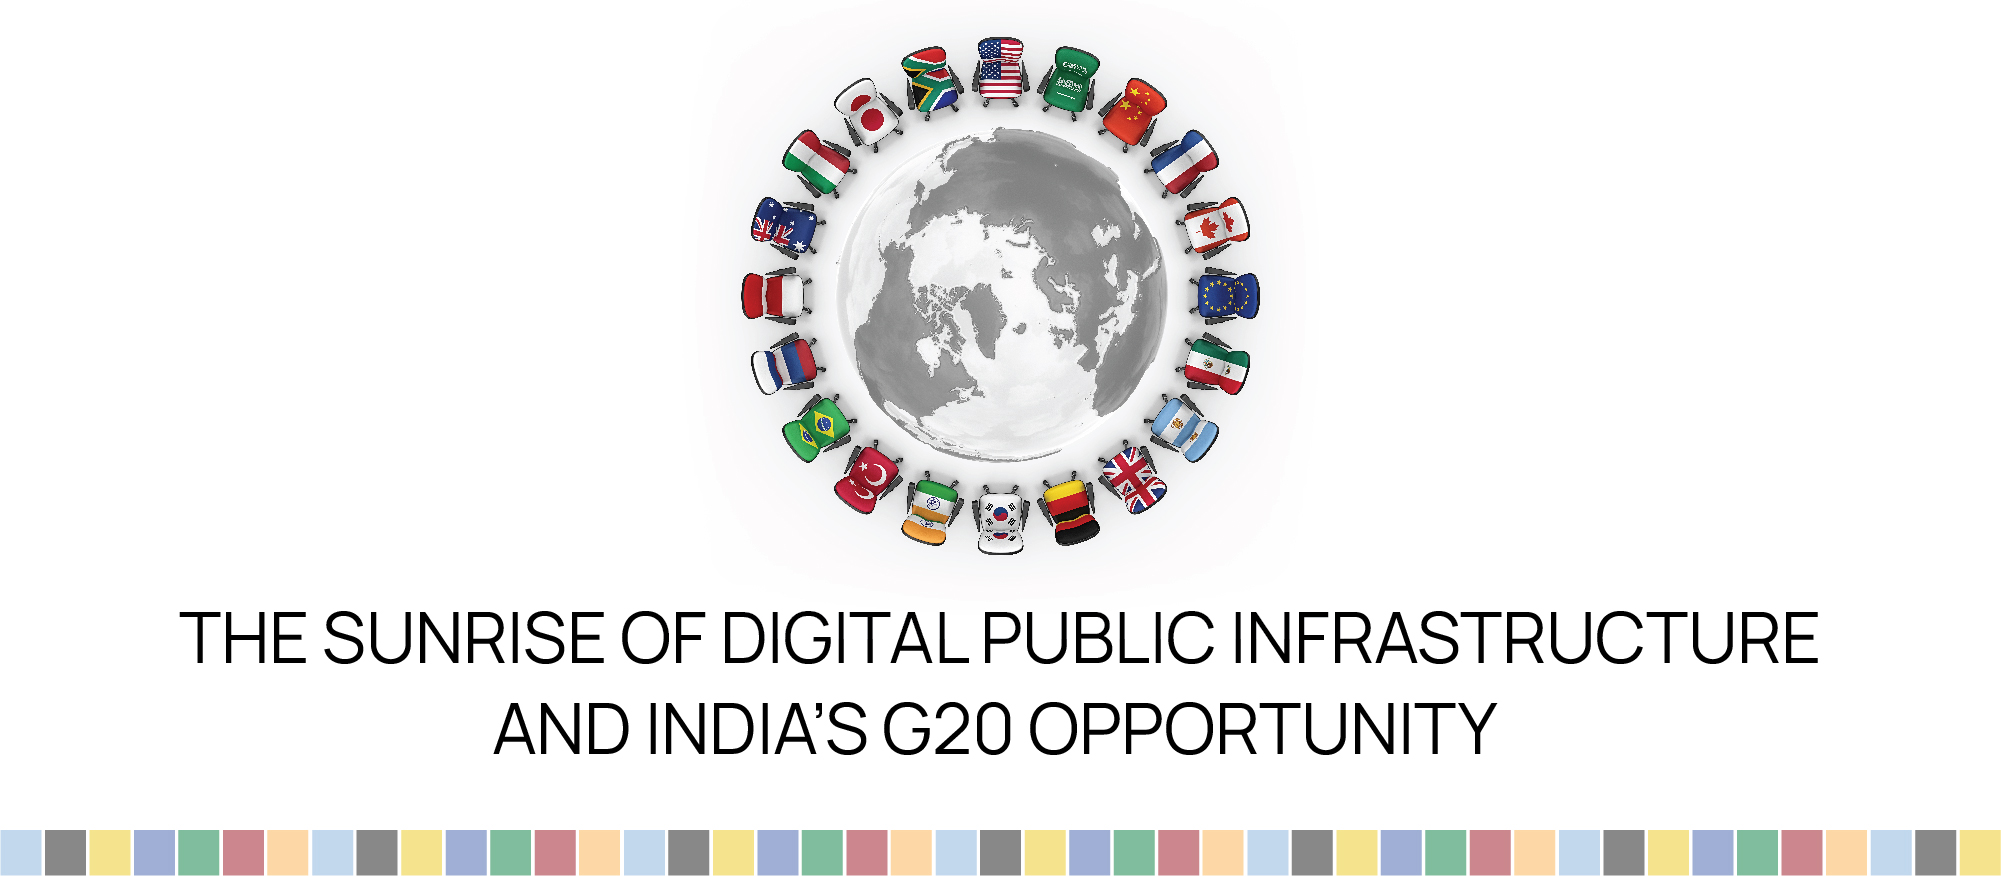 The Sunrise of Digital Public Infrastructure and India’s G20 Opportunity